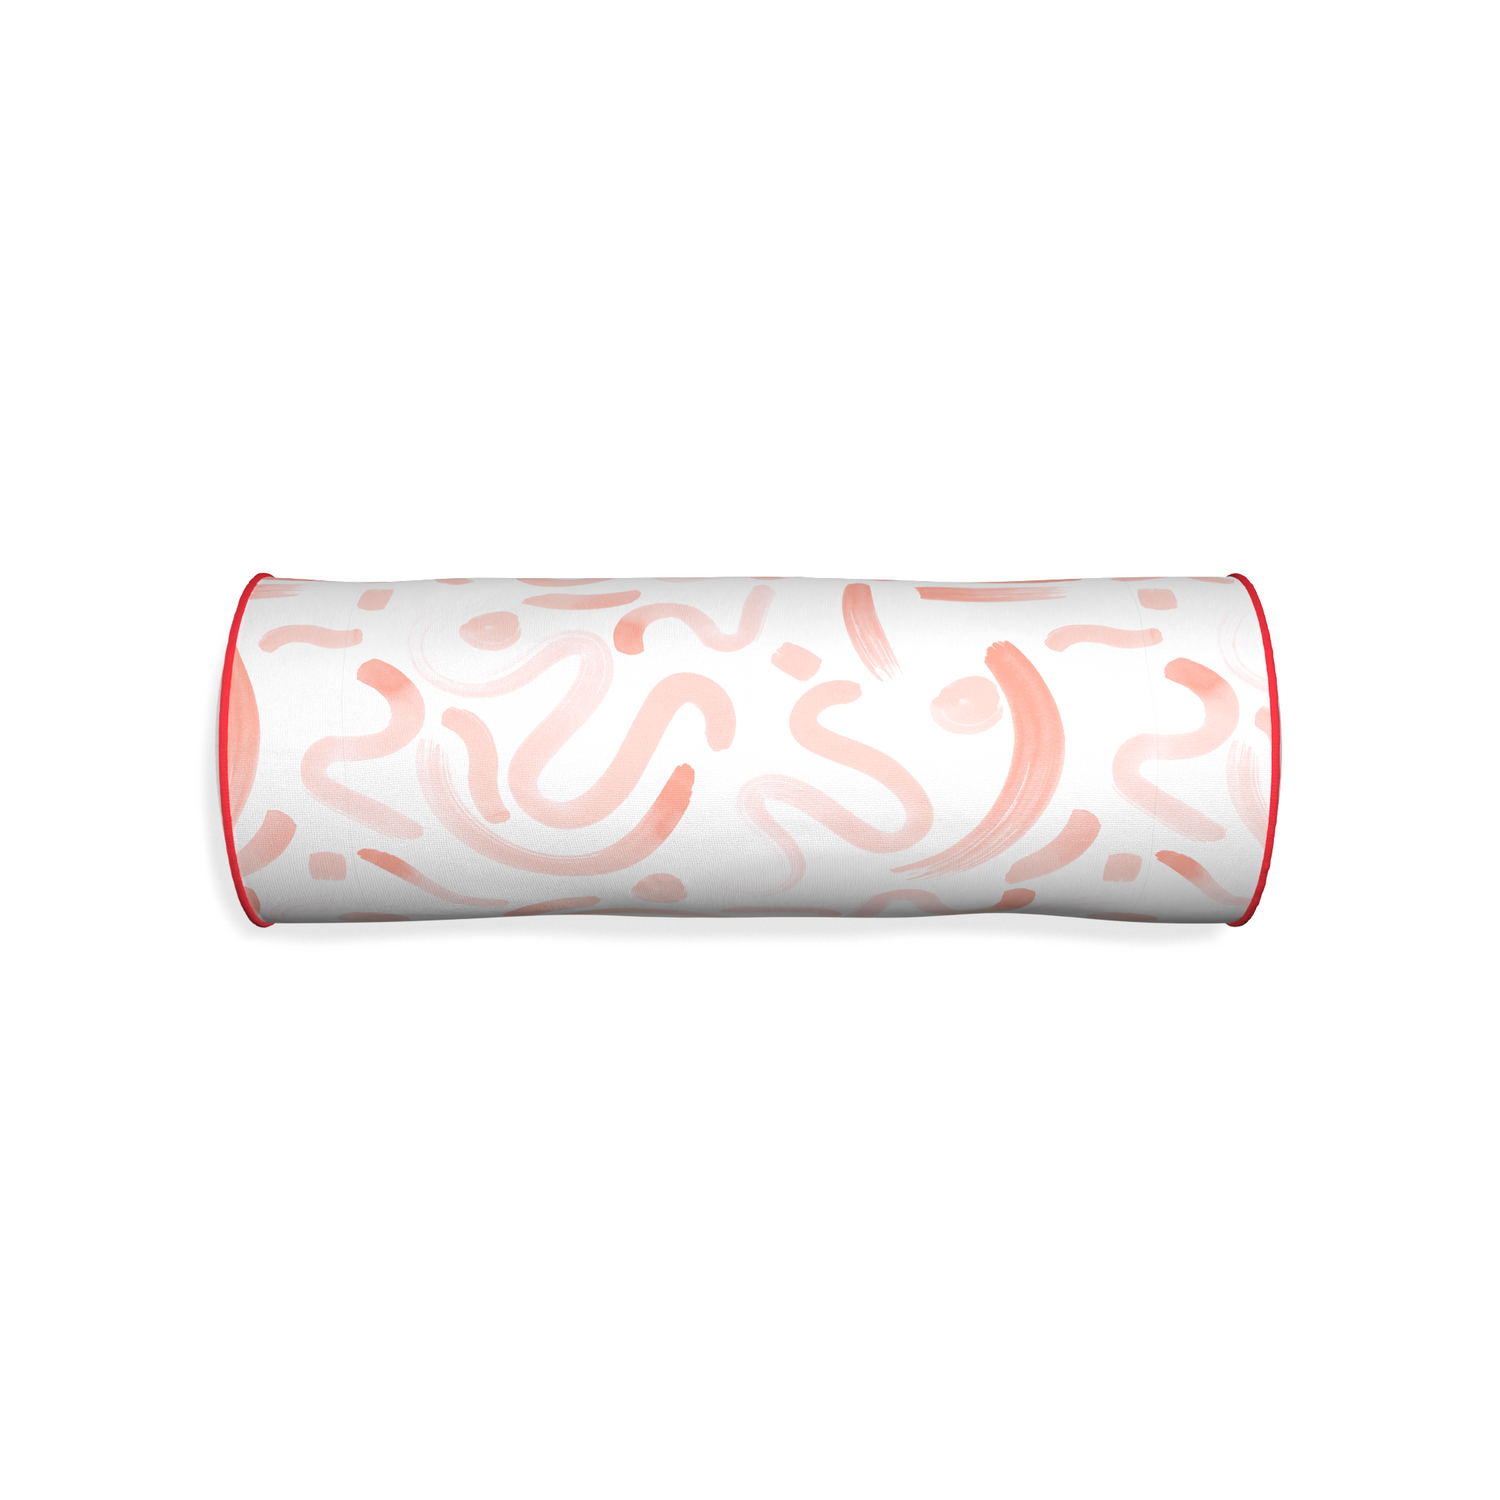 Bolster hockney pink custom pillow with cherry piping on white background